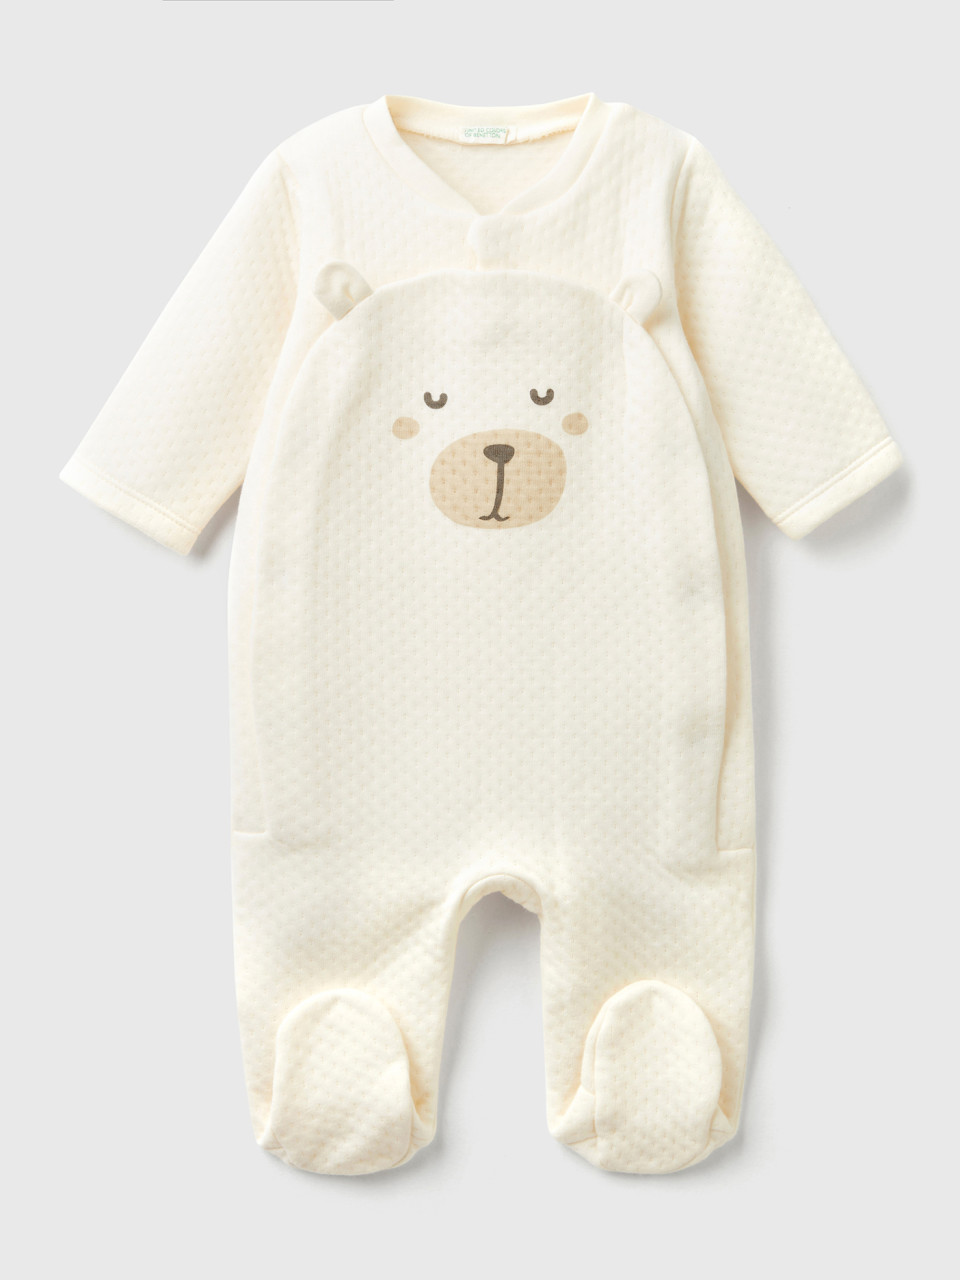 Benetton, Teddy Bear Onesie With Quilted Look, Creamy White, Kids